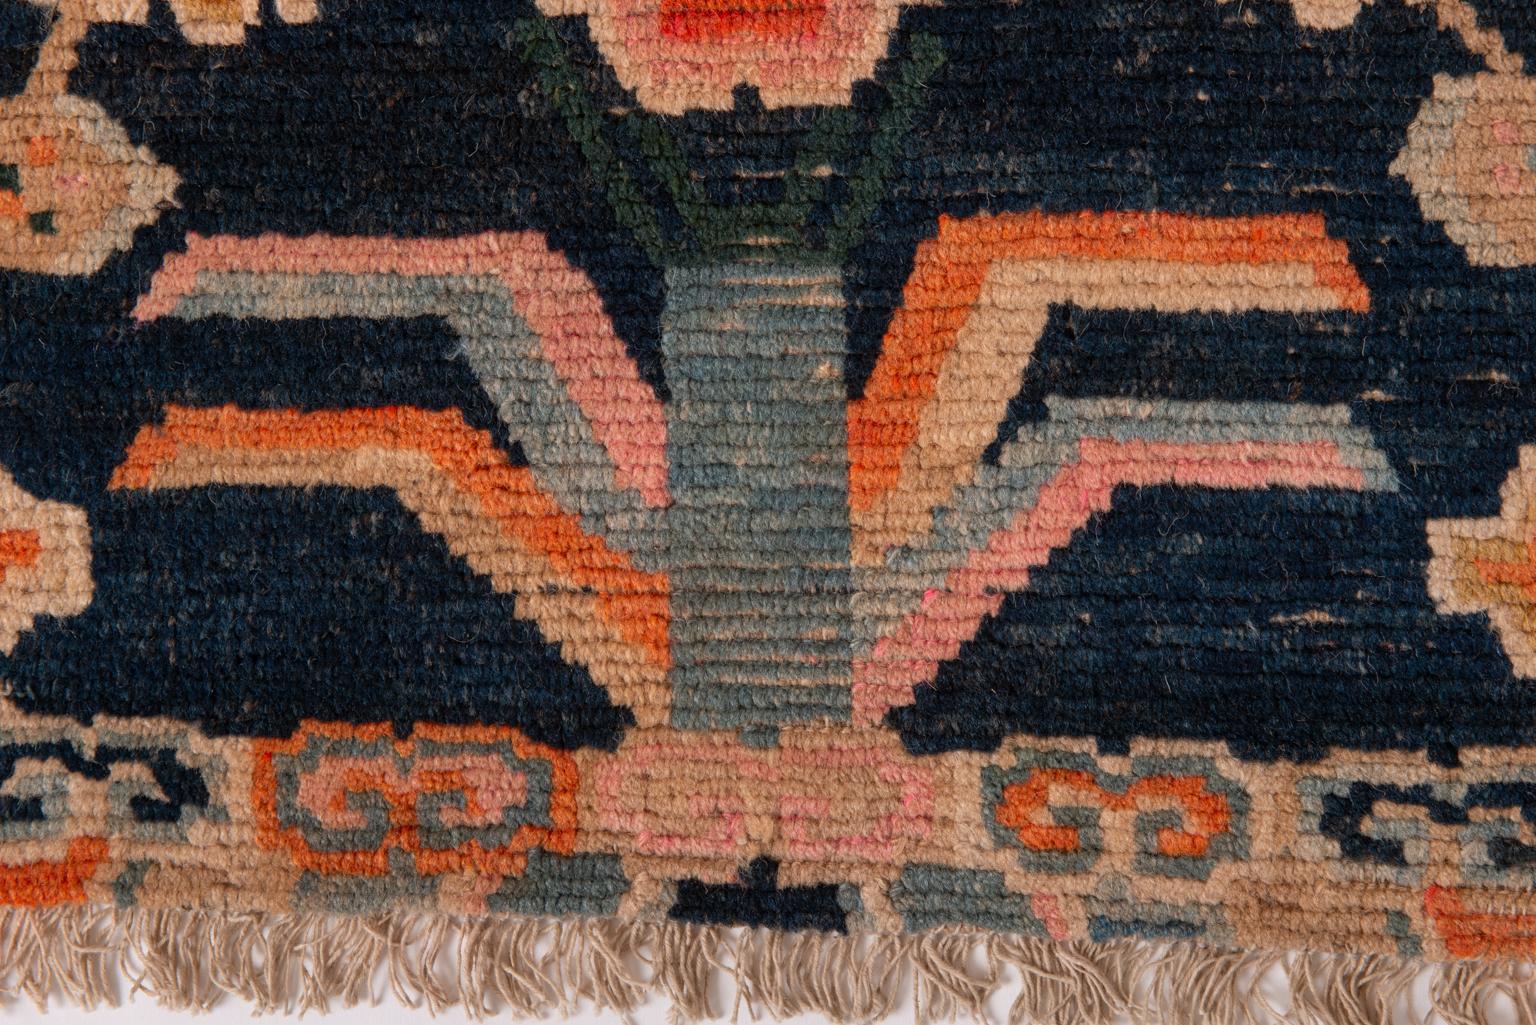 20th Century Tibetan Antique Rug from Private Collection